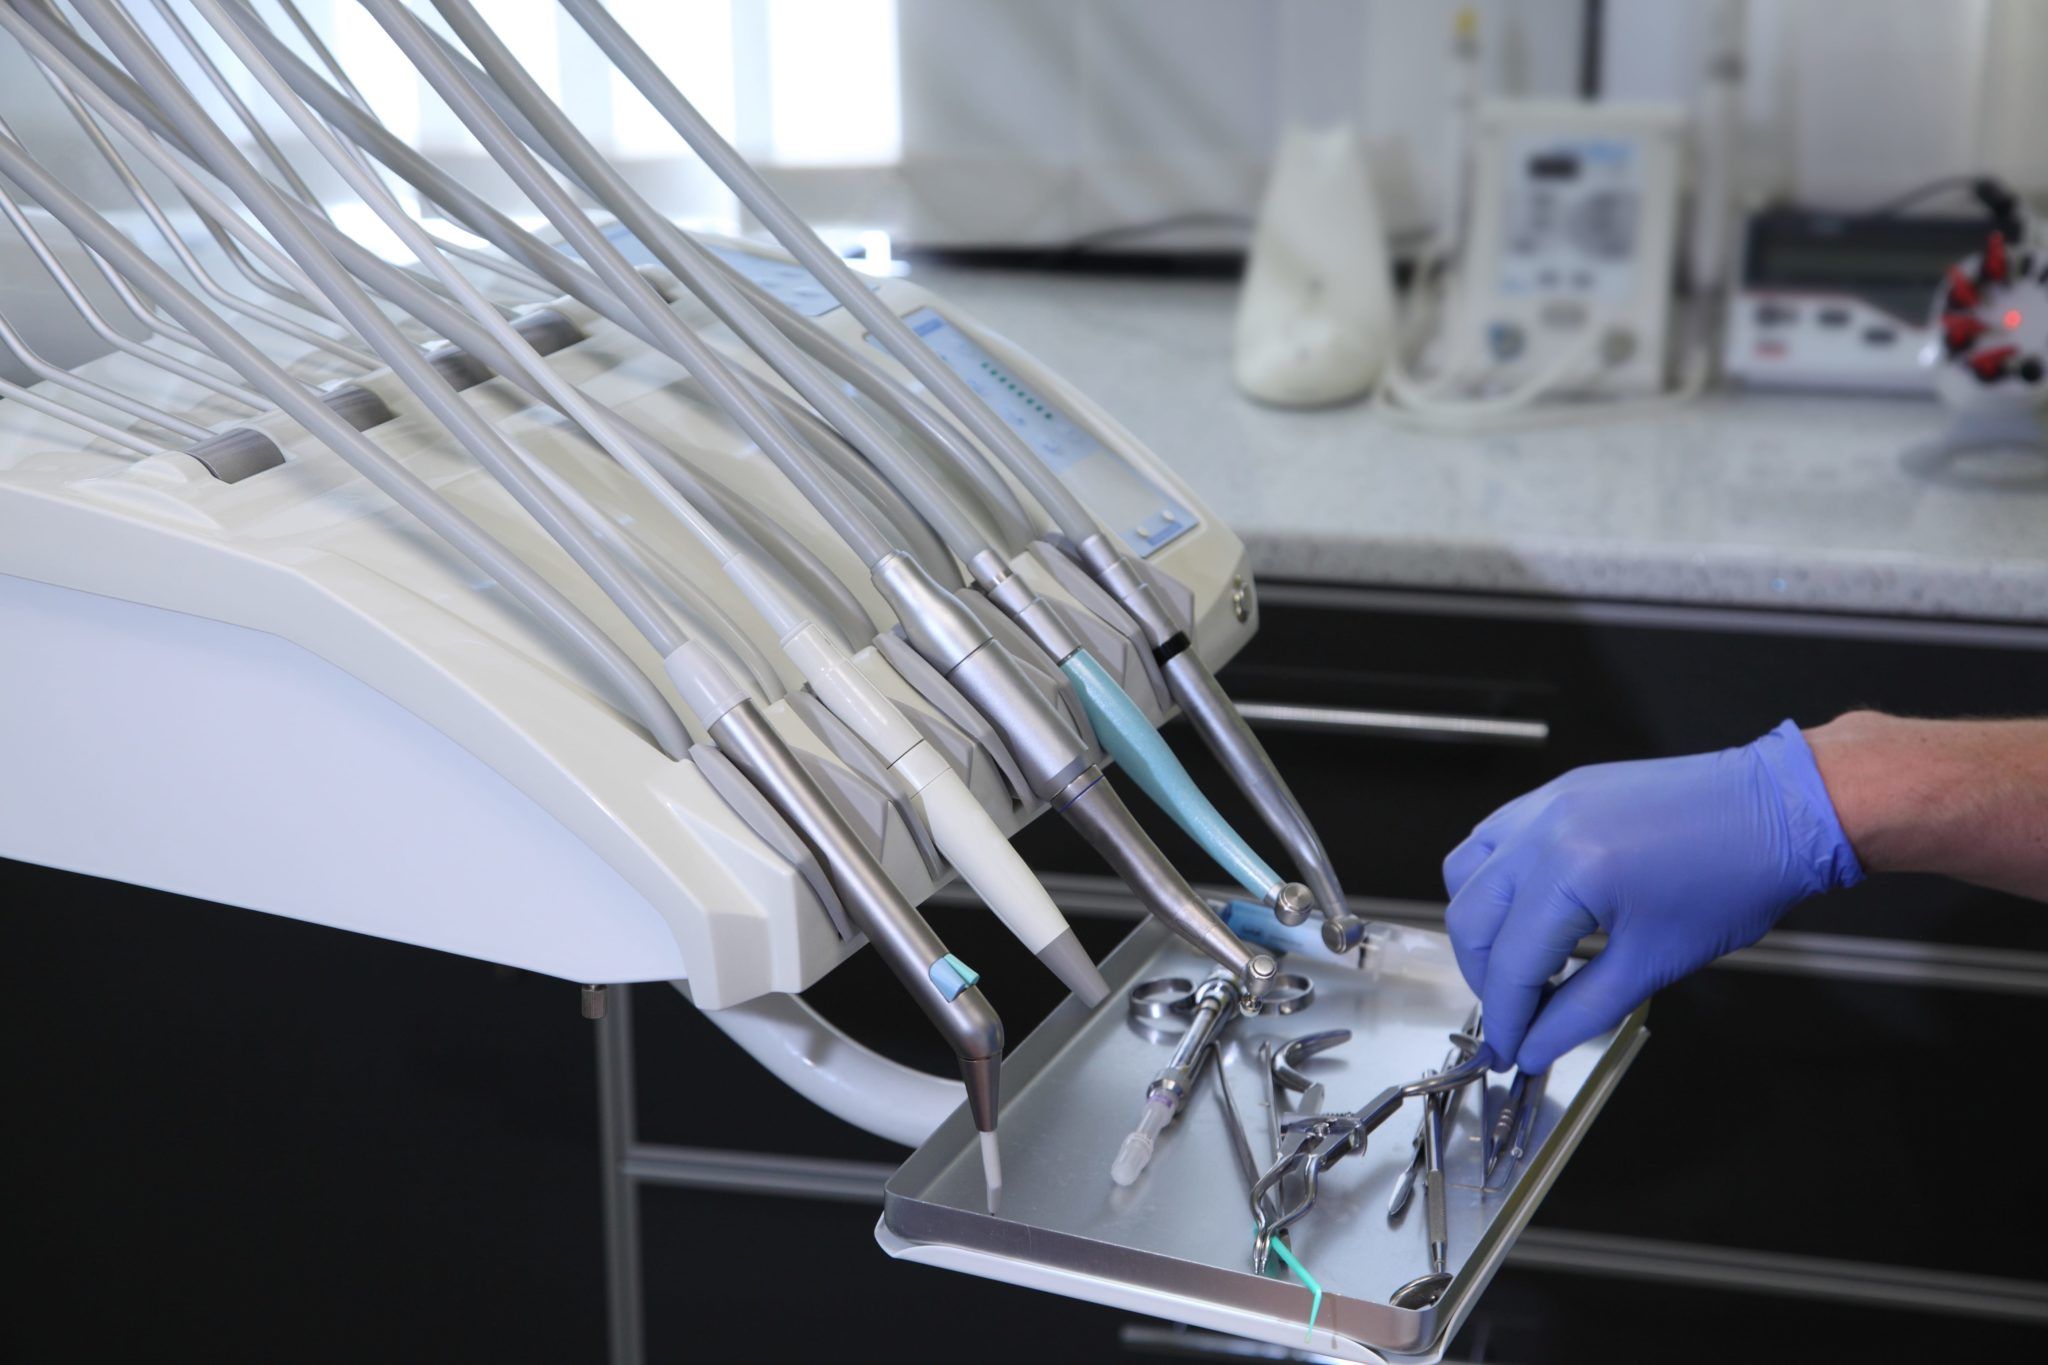 Get Familiar with Dental Tools and Their Uses